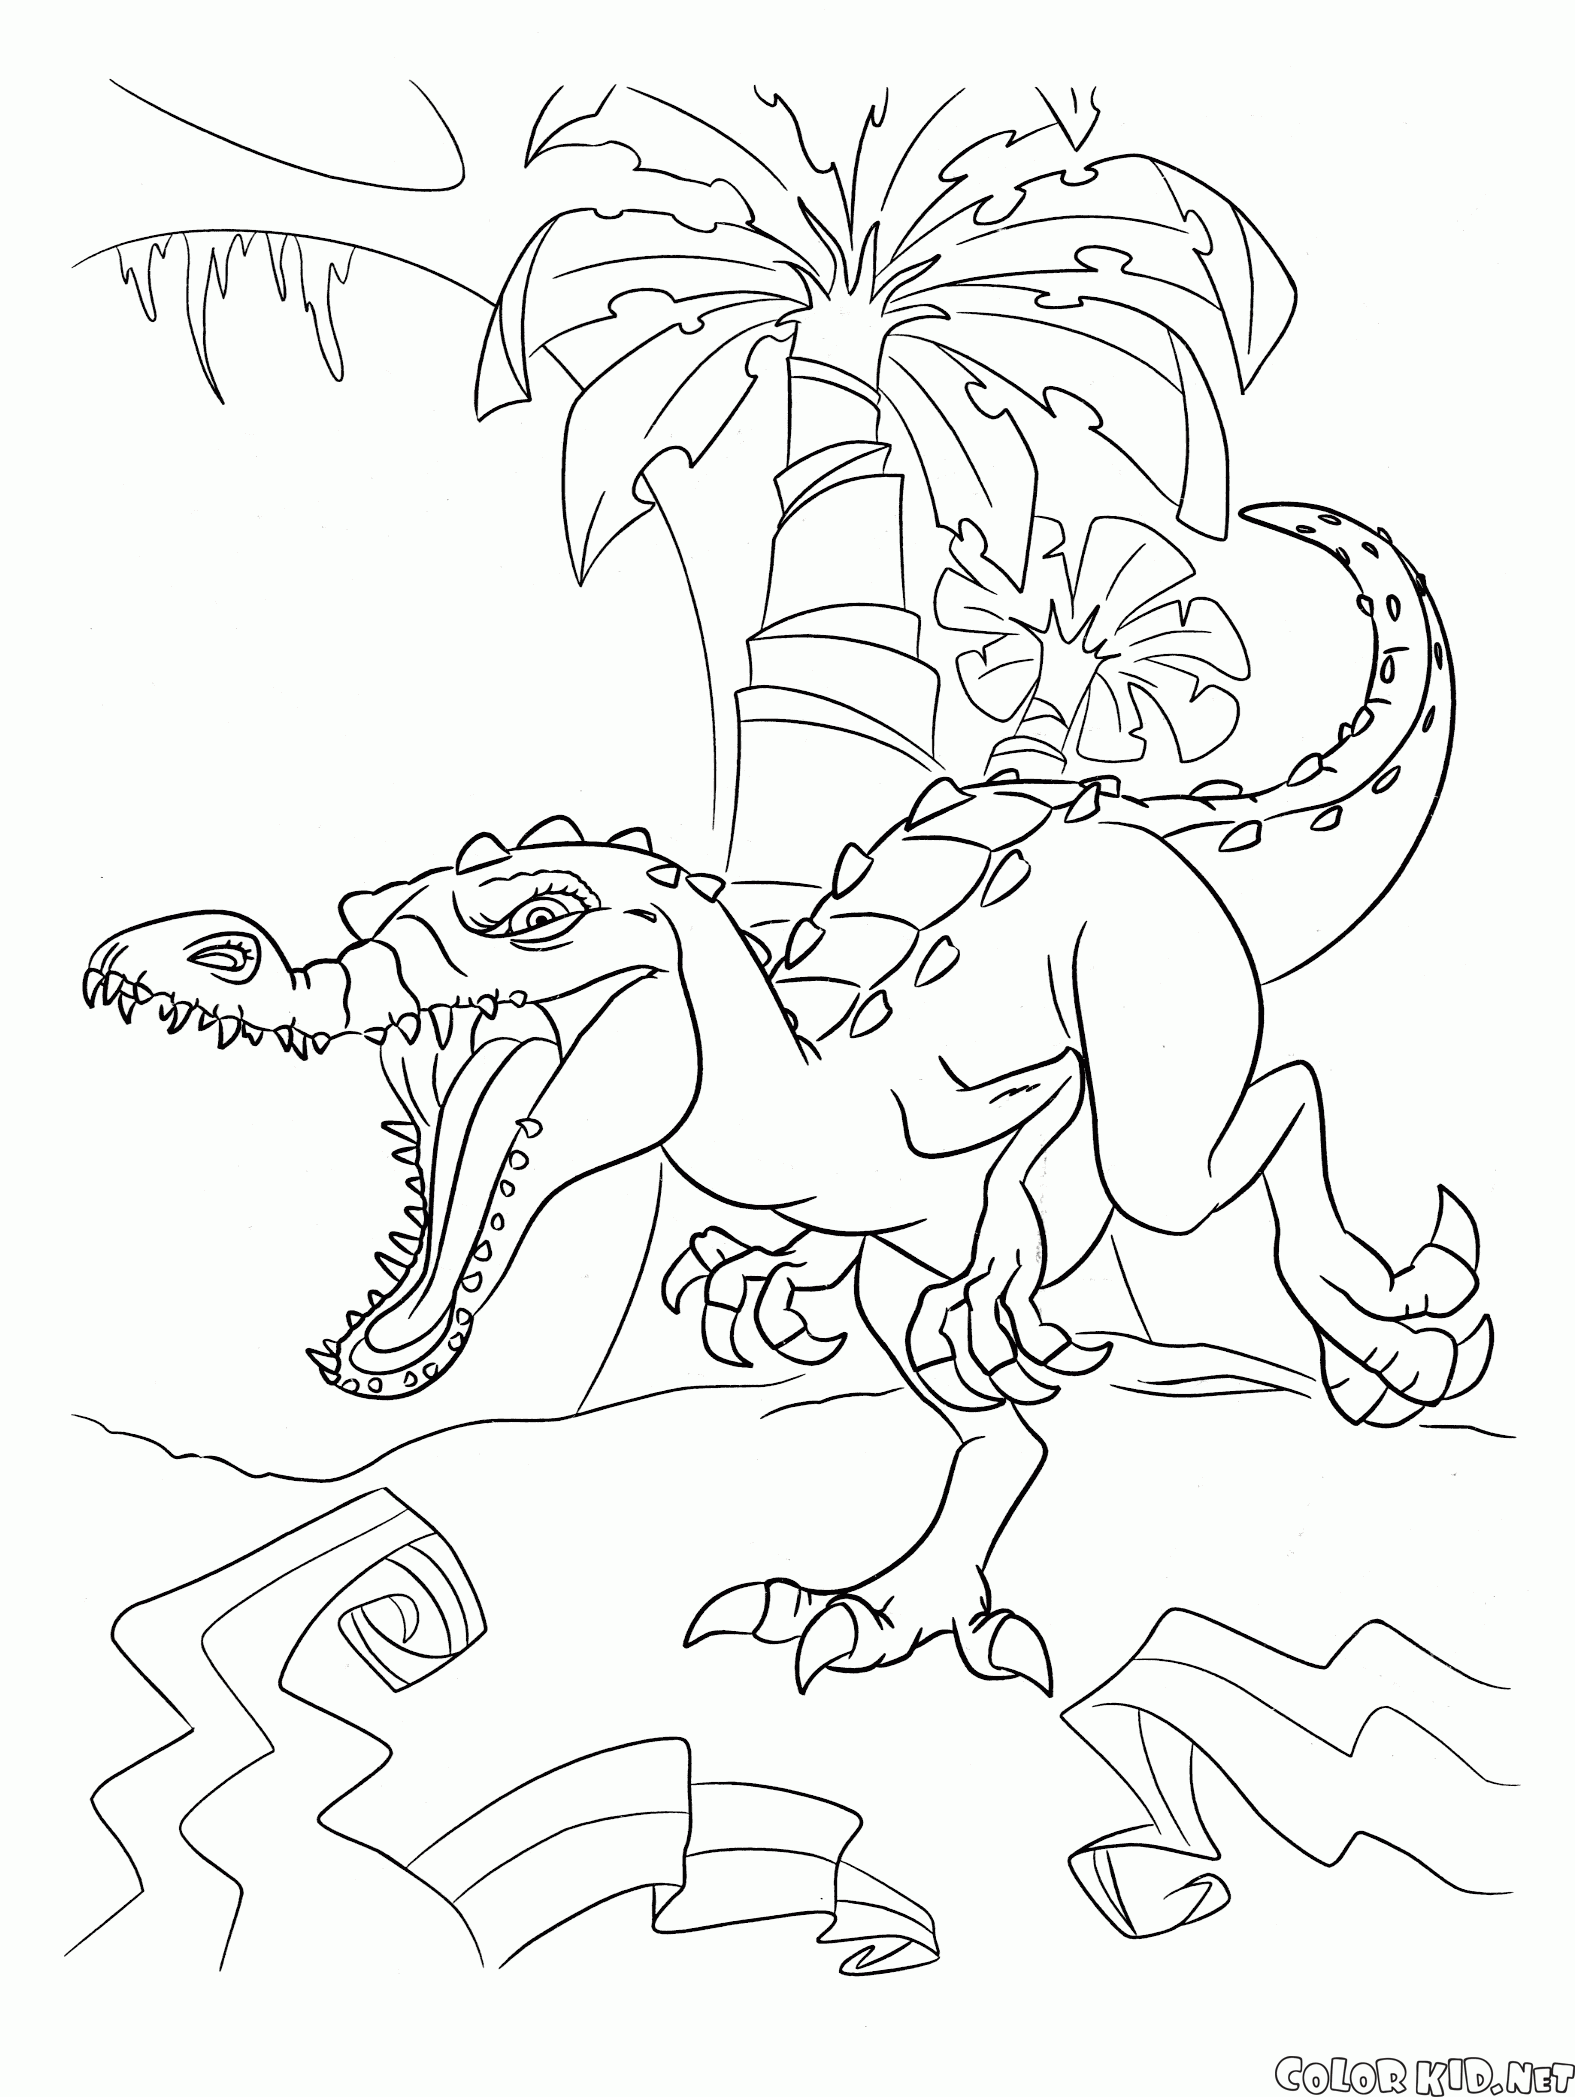 Coloring page - Rudy